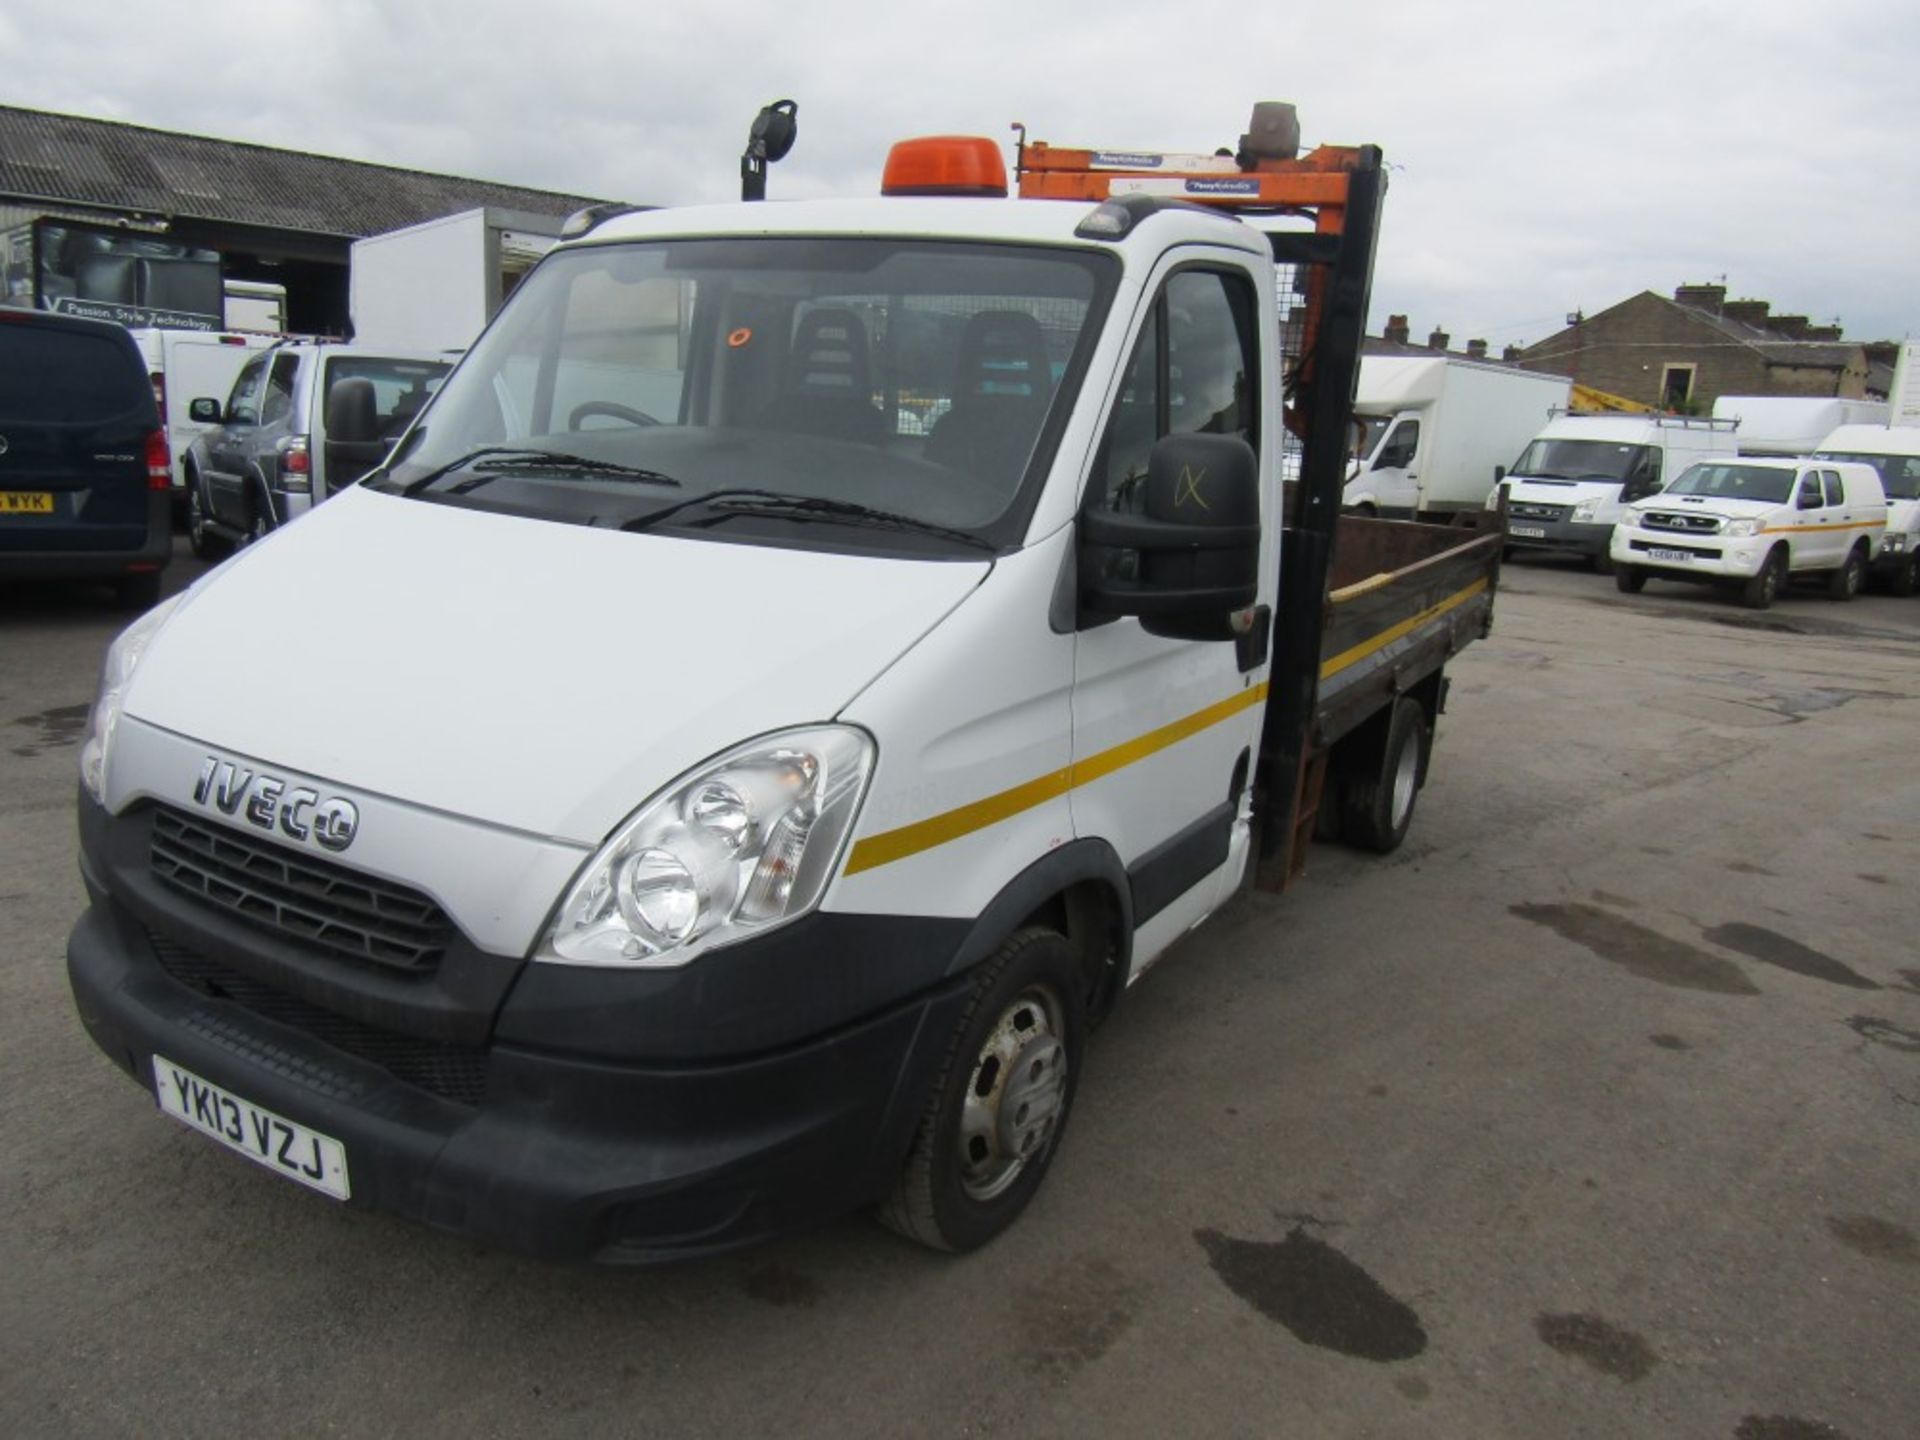 13 reg IVECO DAILY 35C11 TIPPER, 1ST REG 03/13, TEST 02/23, MILEAGE UNKNOWN, V5 HERE, 1 OWNER FROM - Image 2 of 5